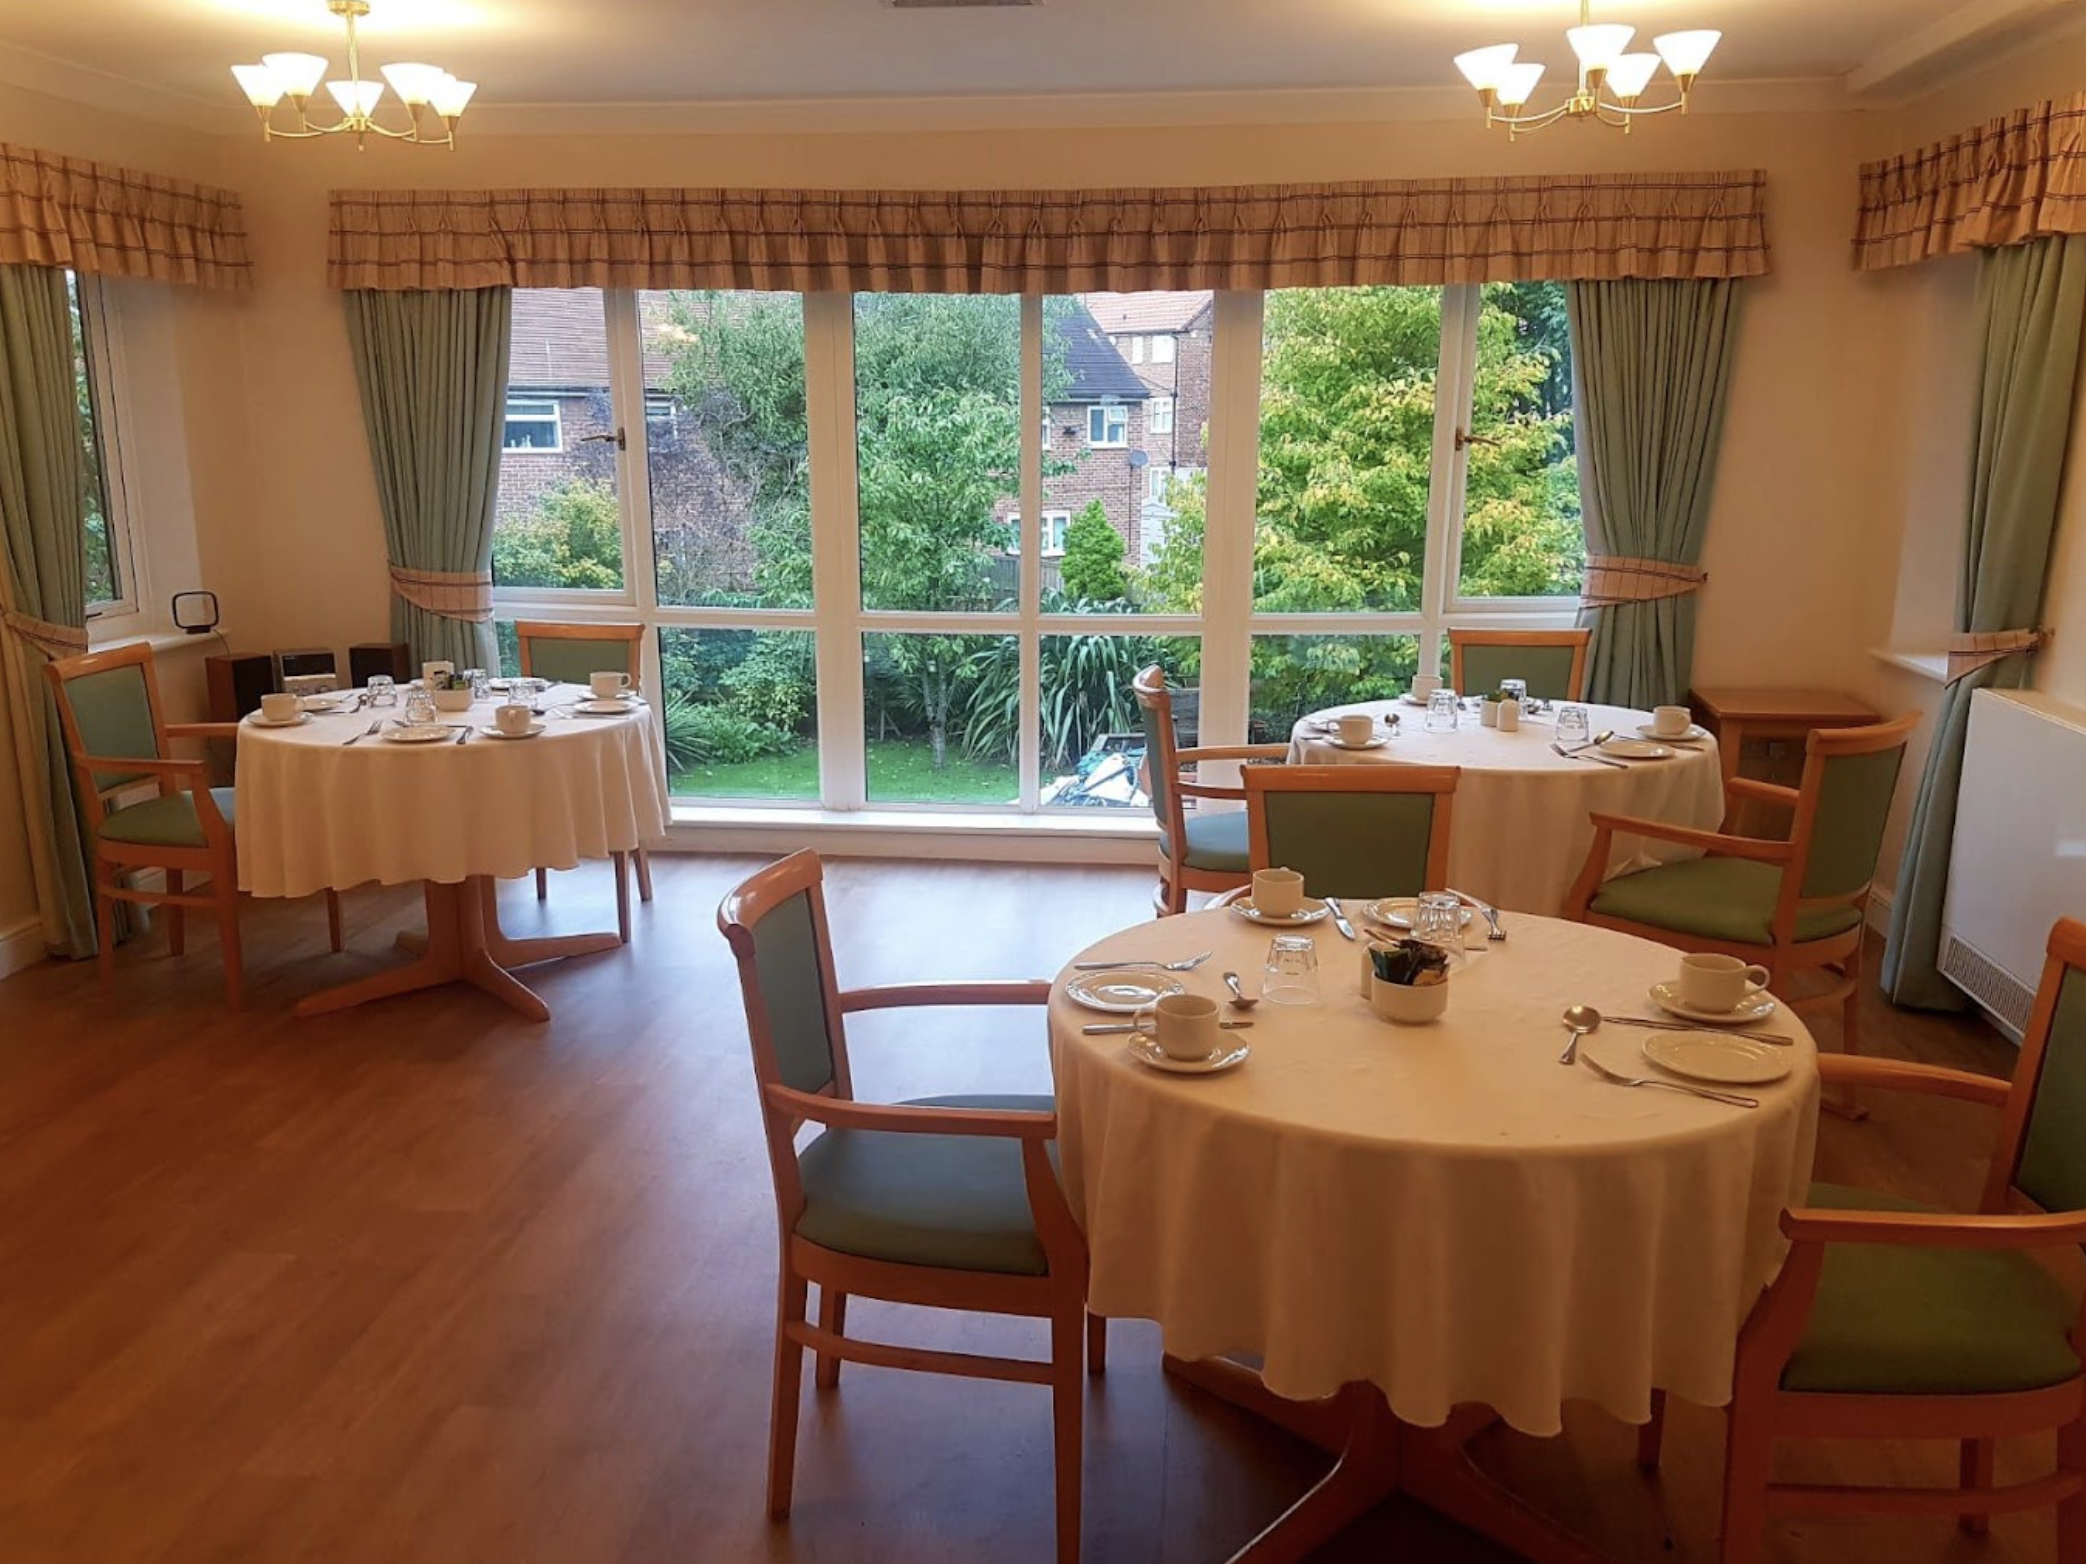 Dining room of Berkeley House care home in Hull, East Yorkshire